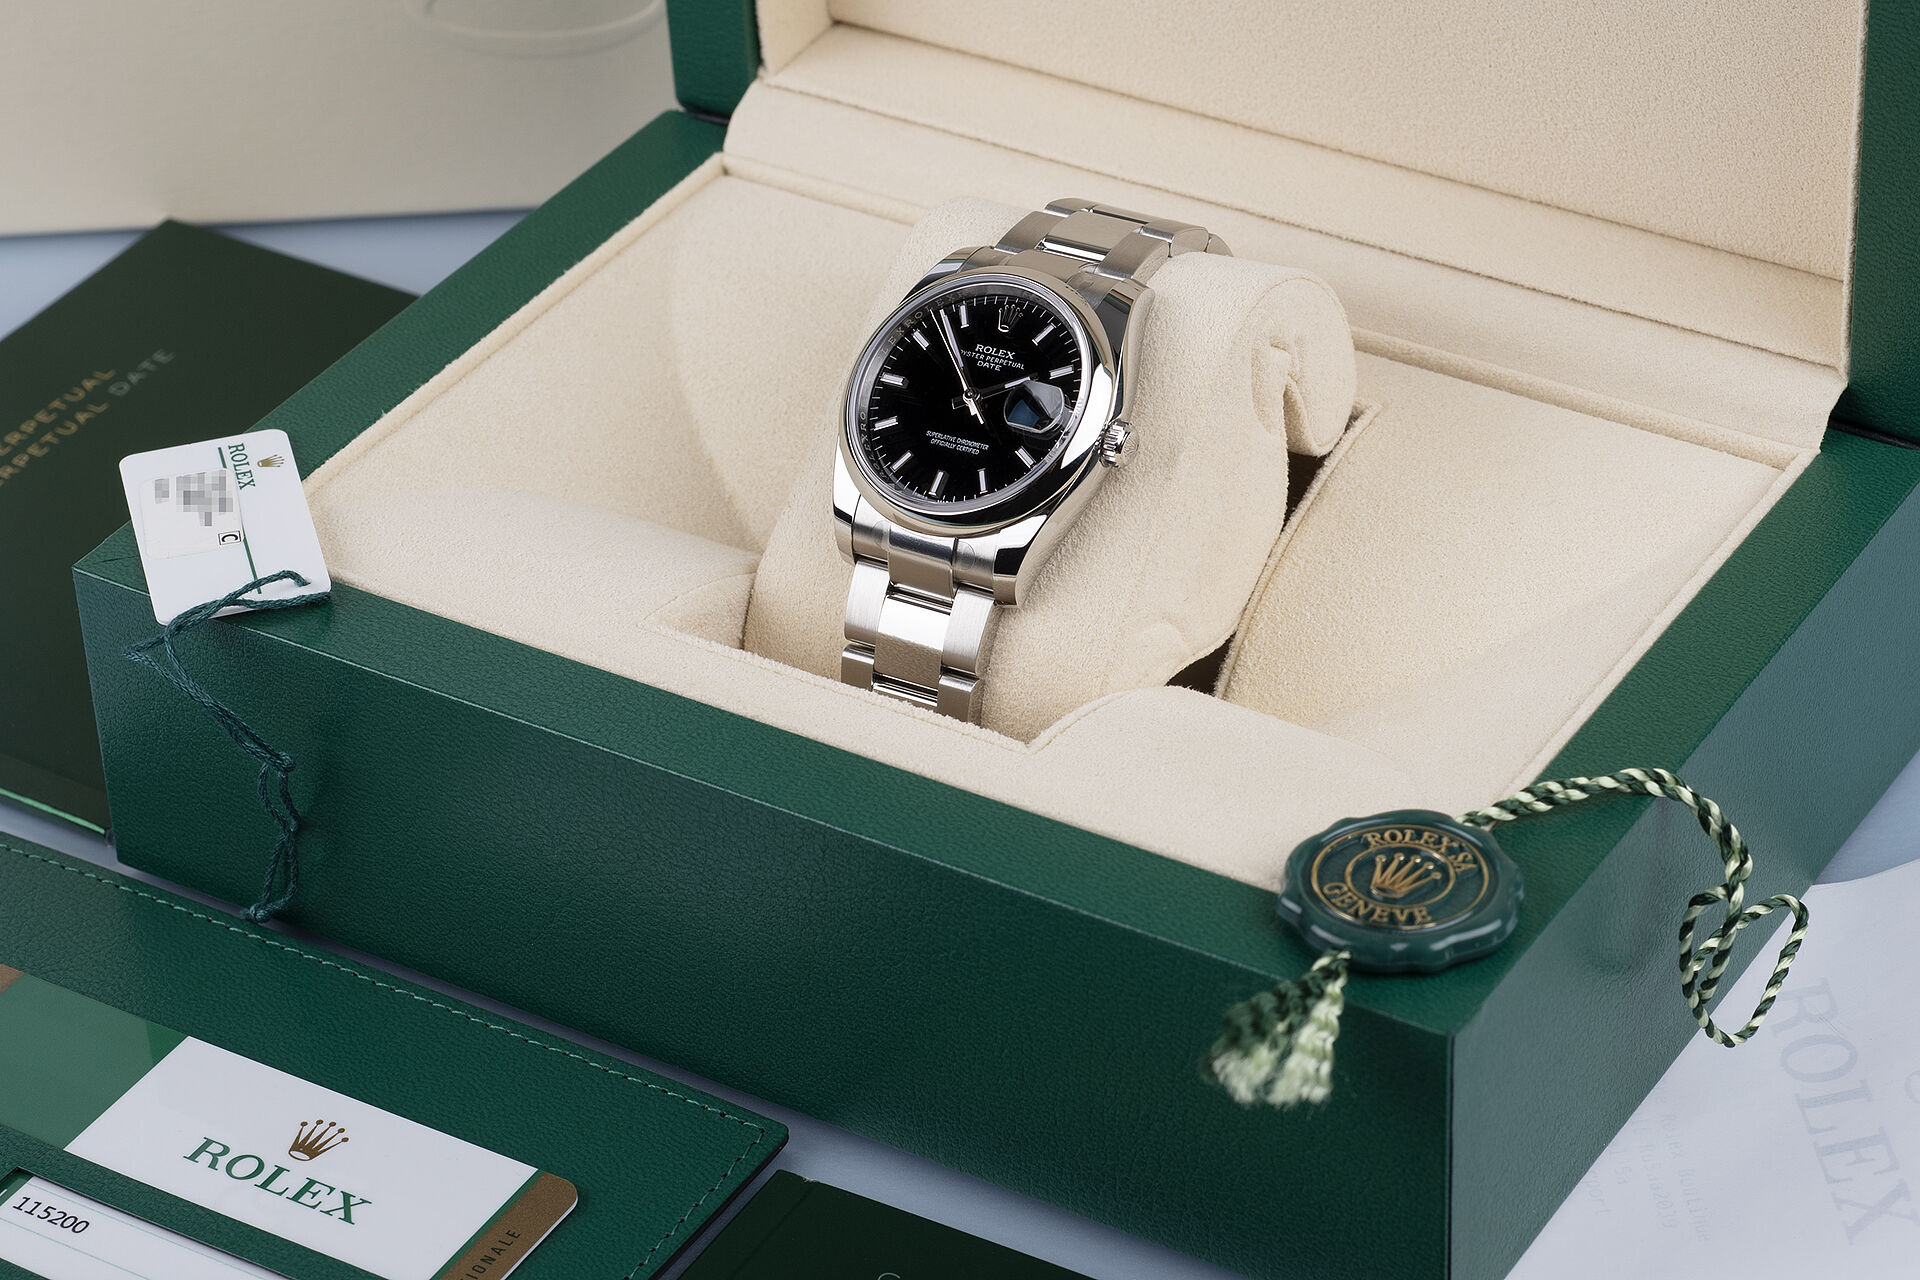 ref 115200 | Rolex Warranty to 2024 | Rolex Oyster Perpetual Date